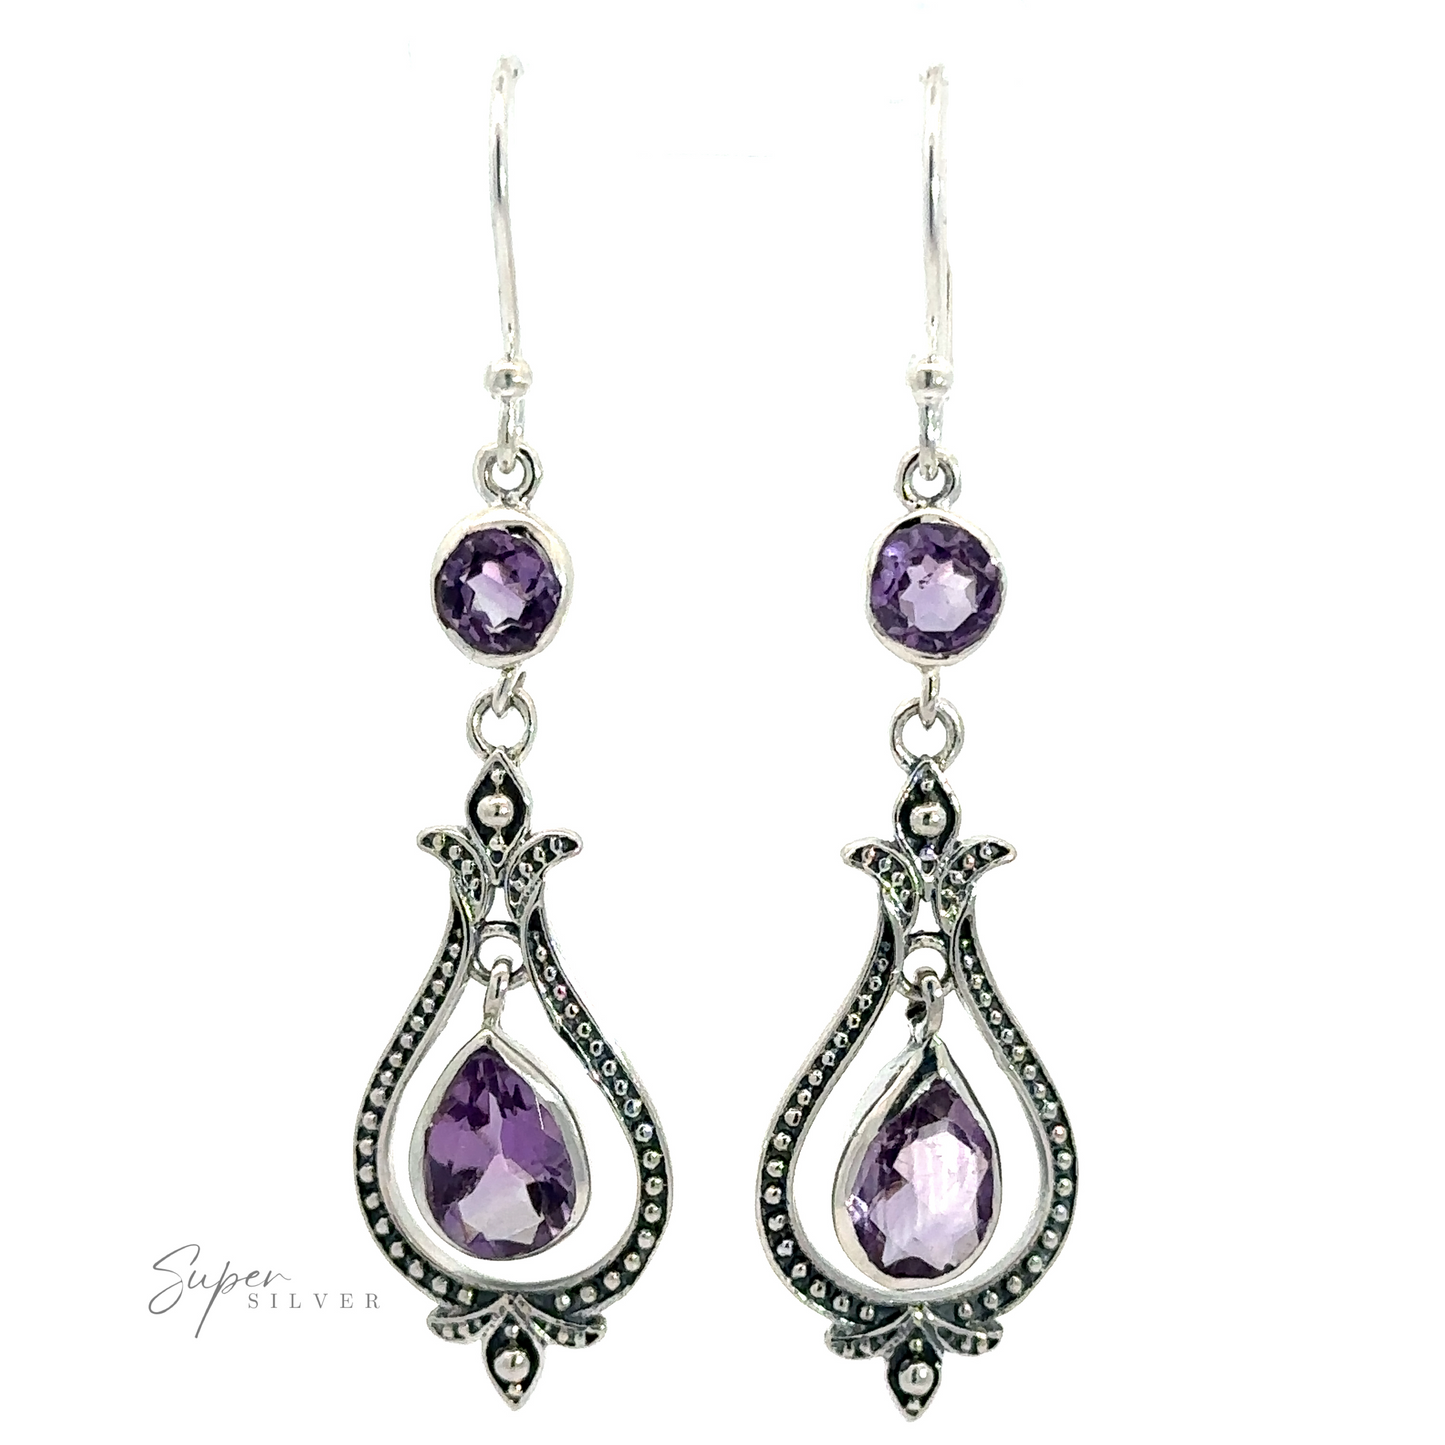 
                  
                    A pair of Vintage-Styled Teardrop Earrings with Gemstones featuring small round purple gemstones at the top and larger teardrop-shaped purple gemstones, all encased in an ornate, .925 sterling silver design.
                  
                